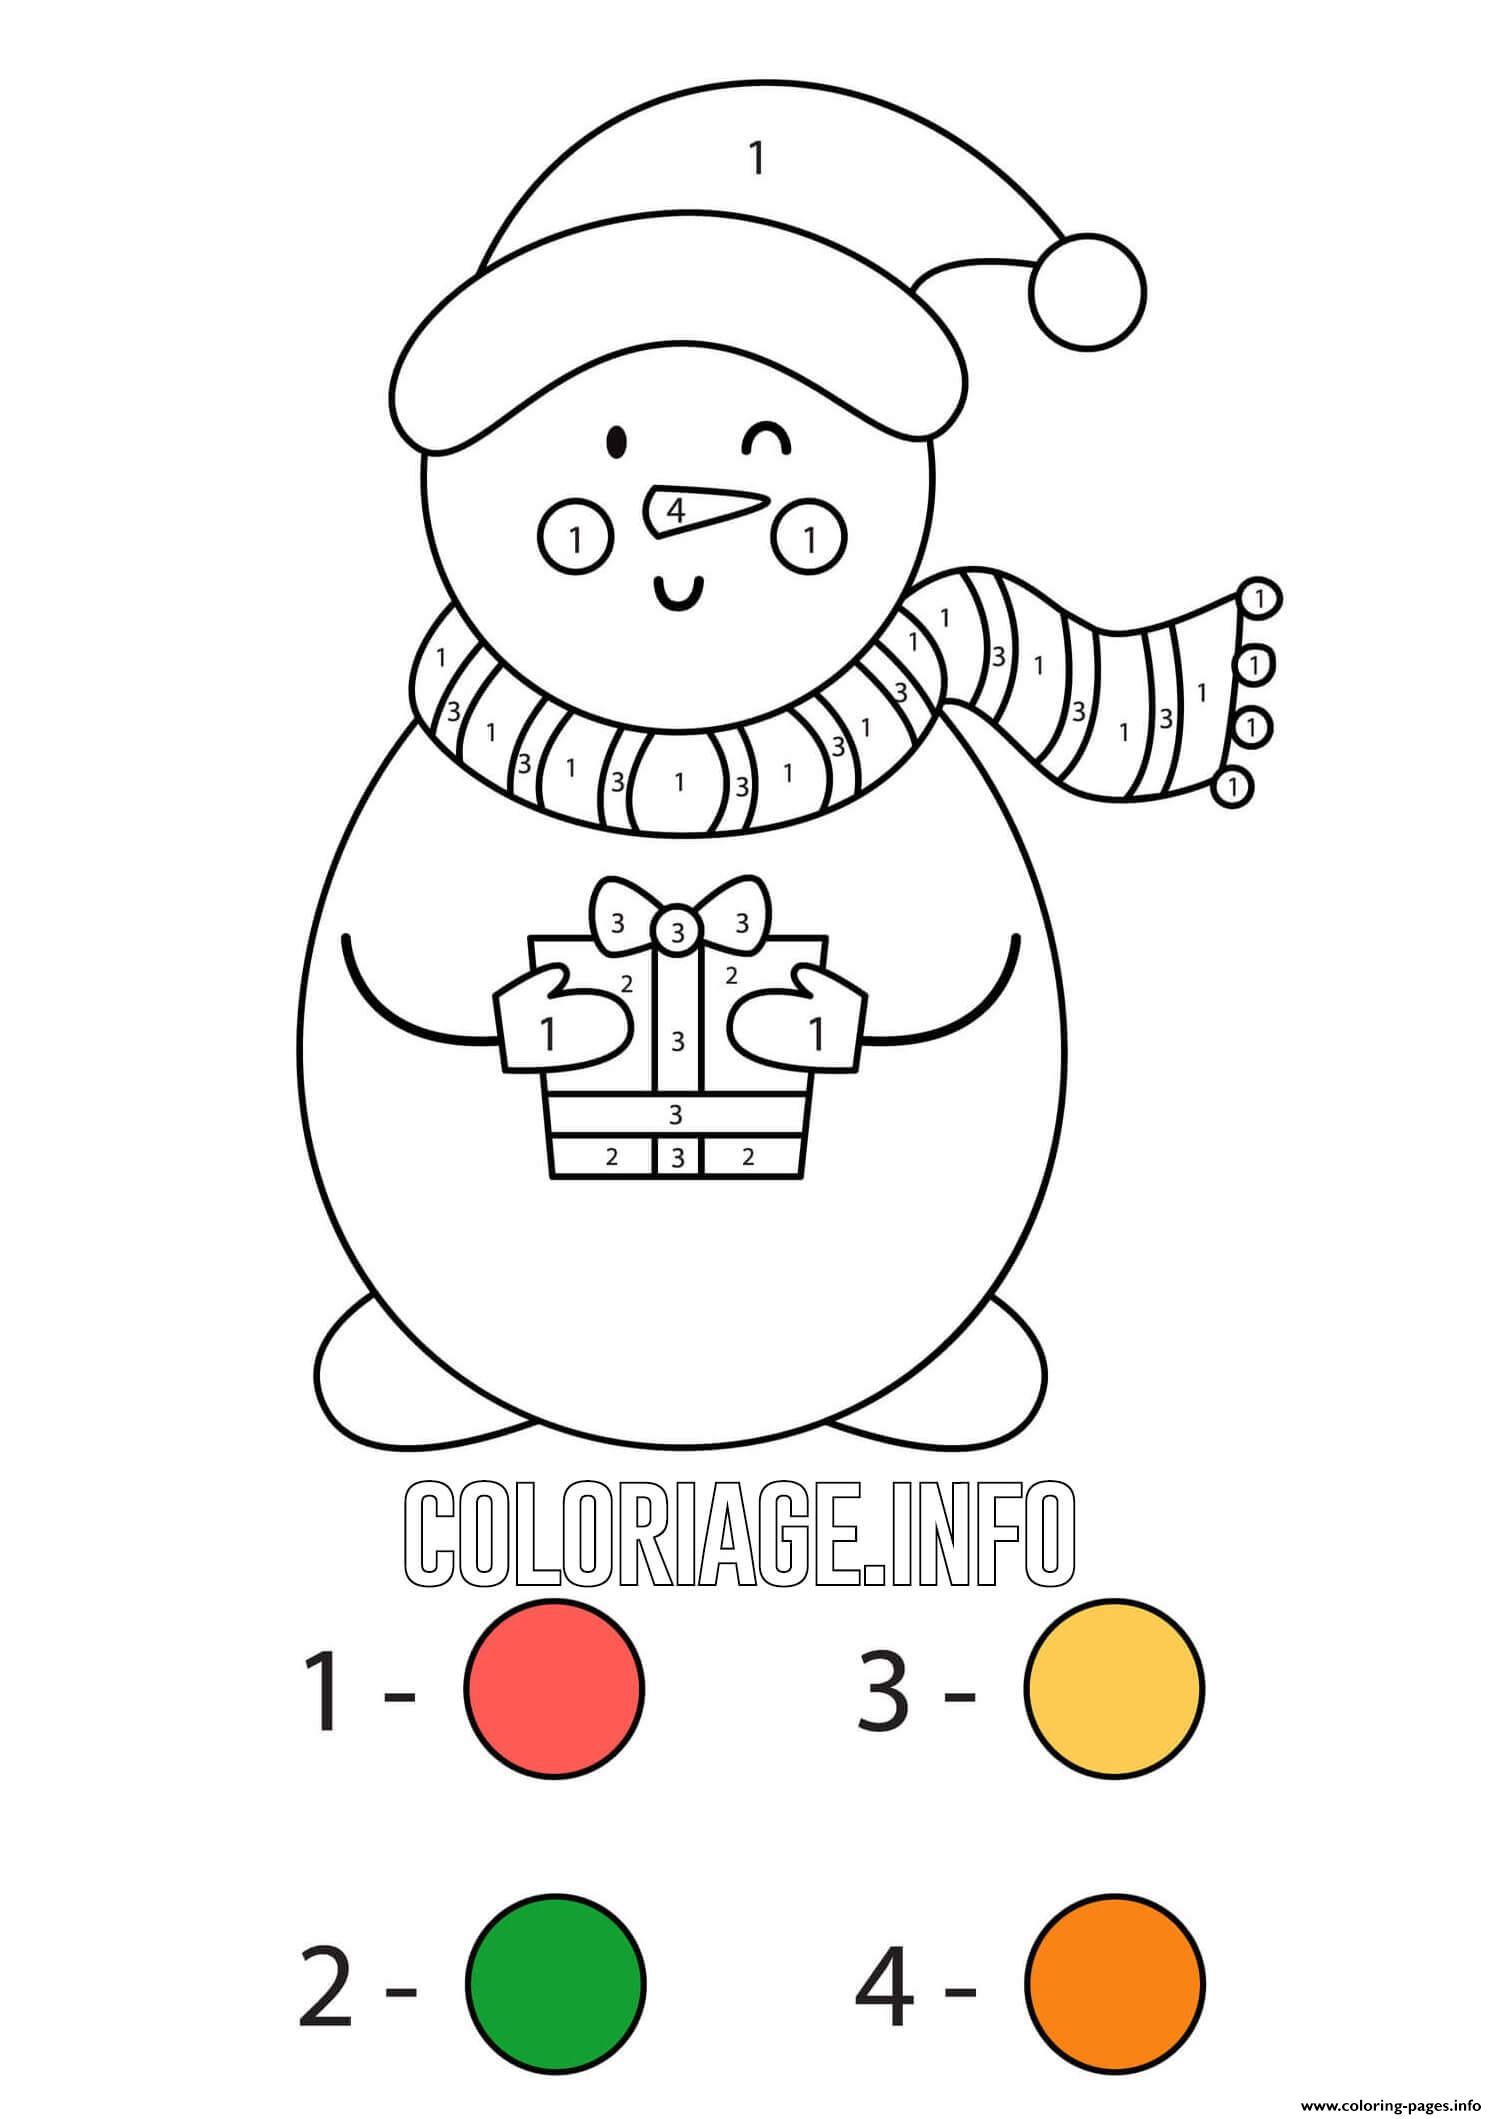 snowman-with-a-gift-color-by-number-coloring-page-printable